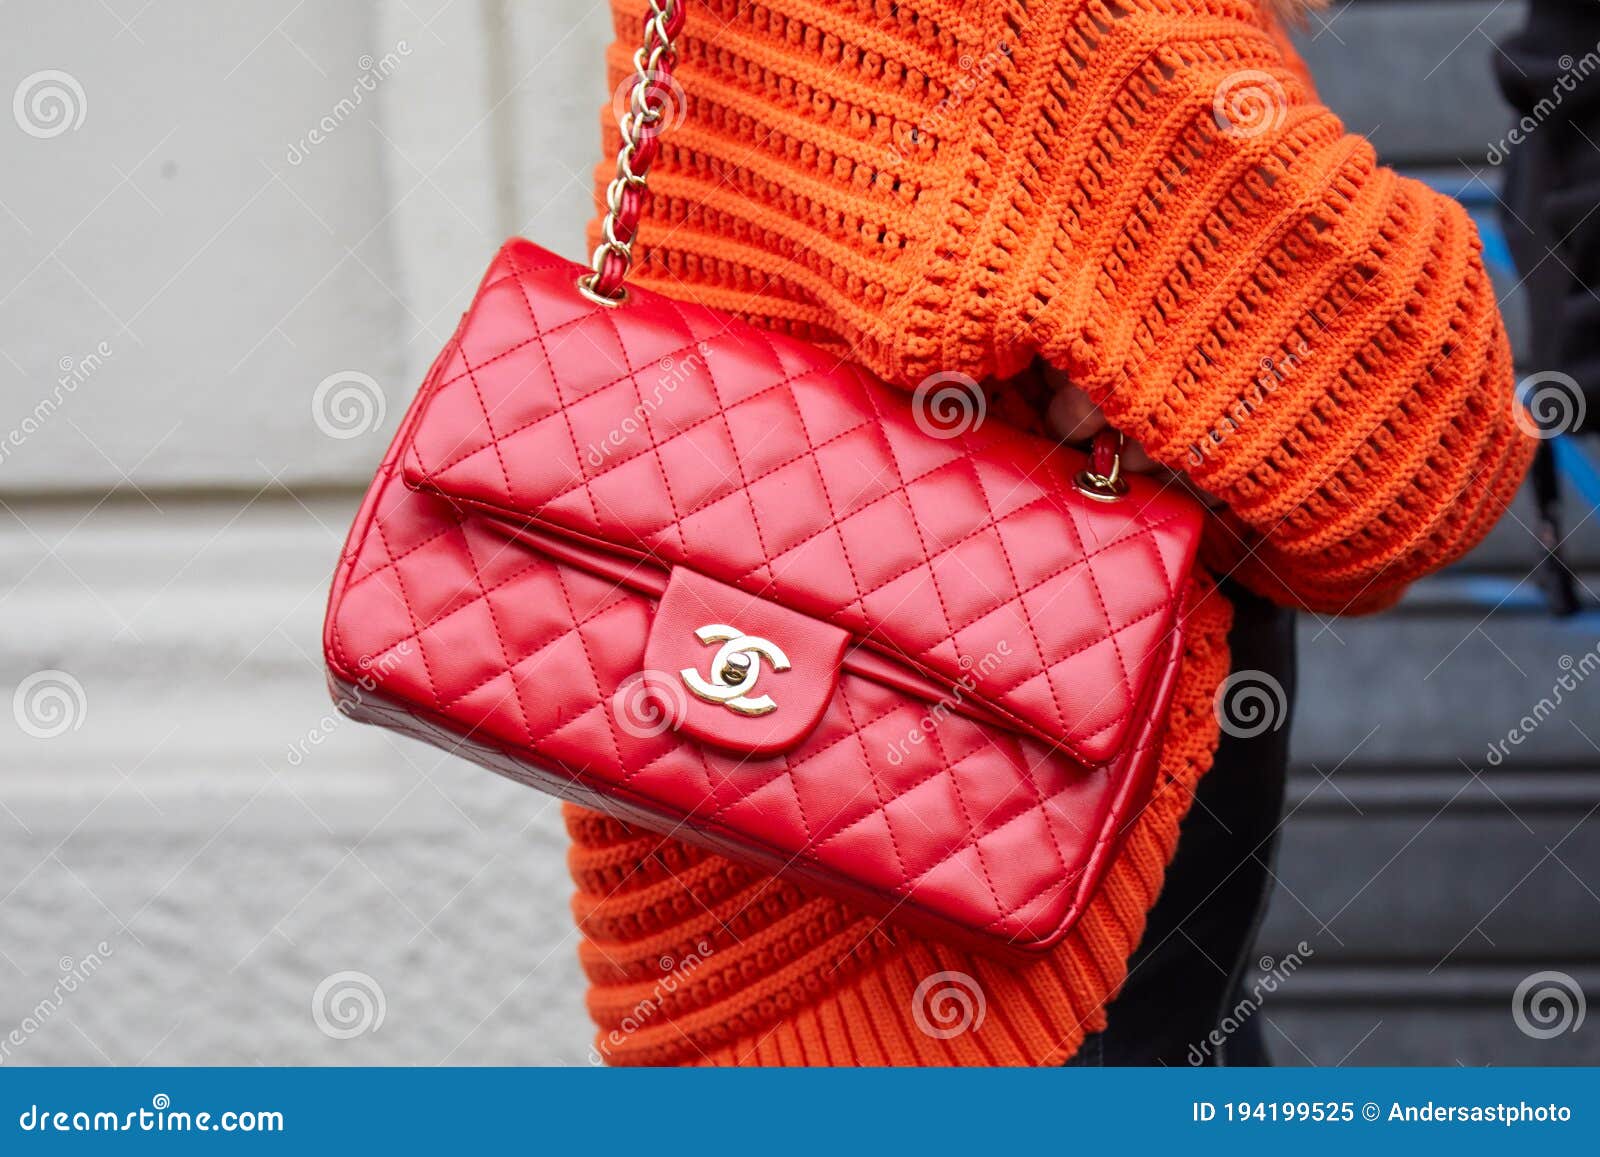 Woman with Red Leather Chanel Bag and Orange Sweater before Boss